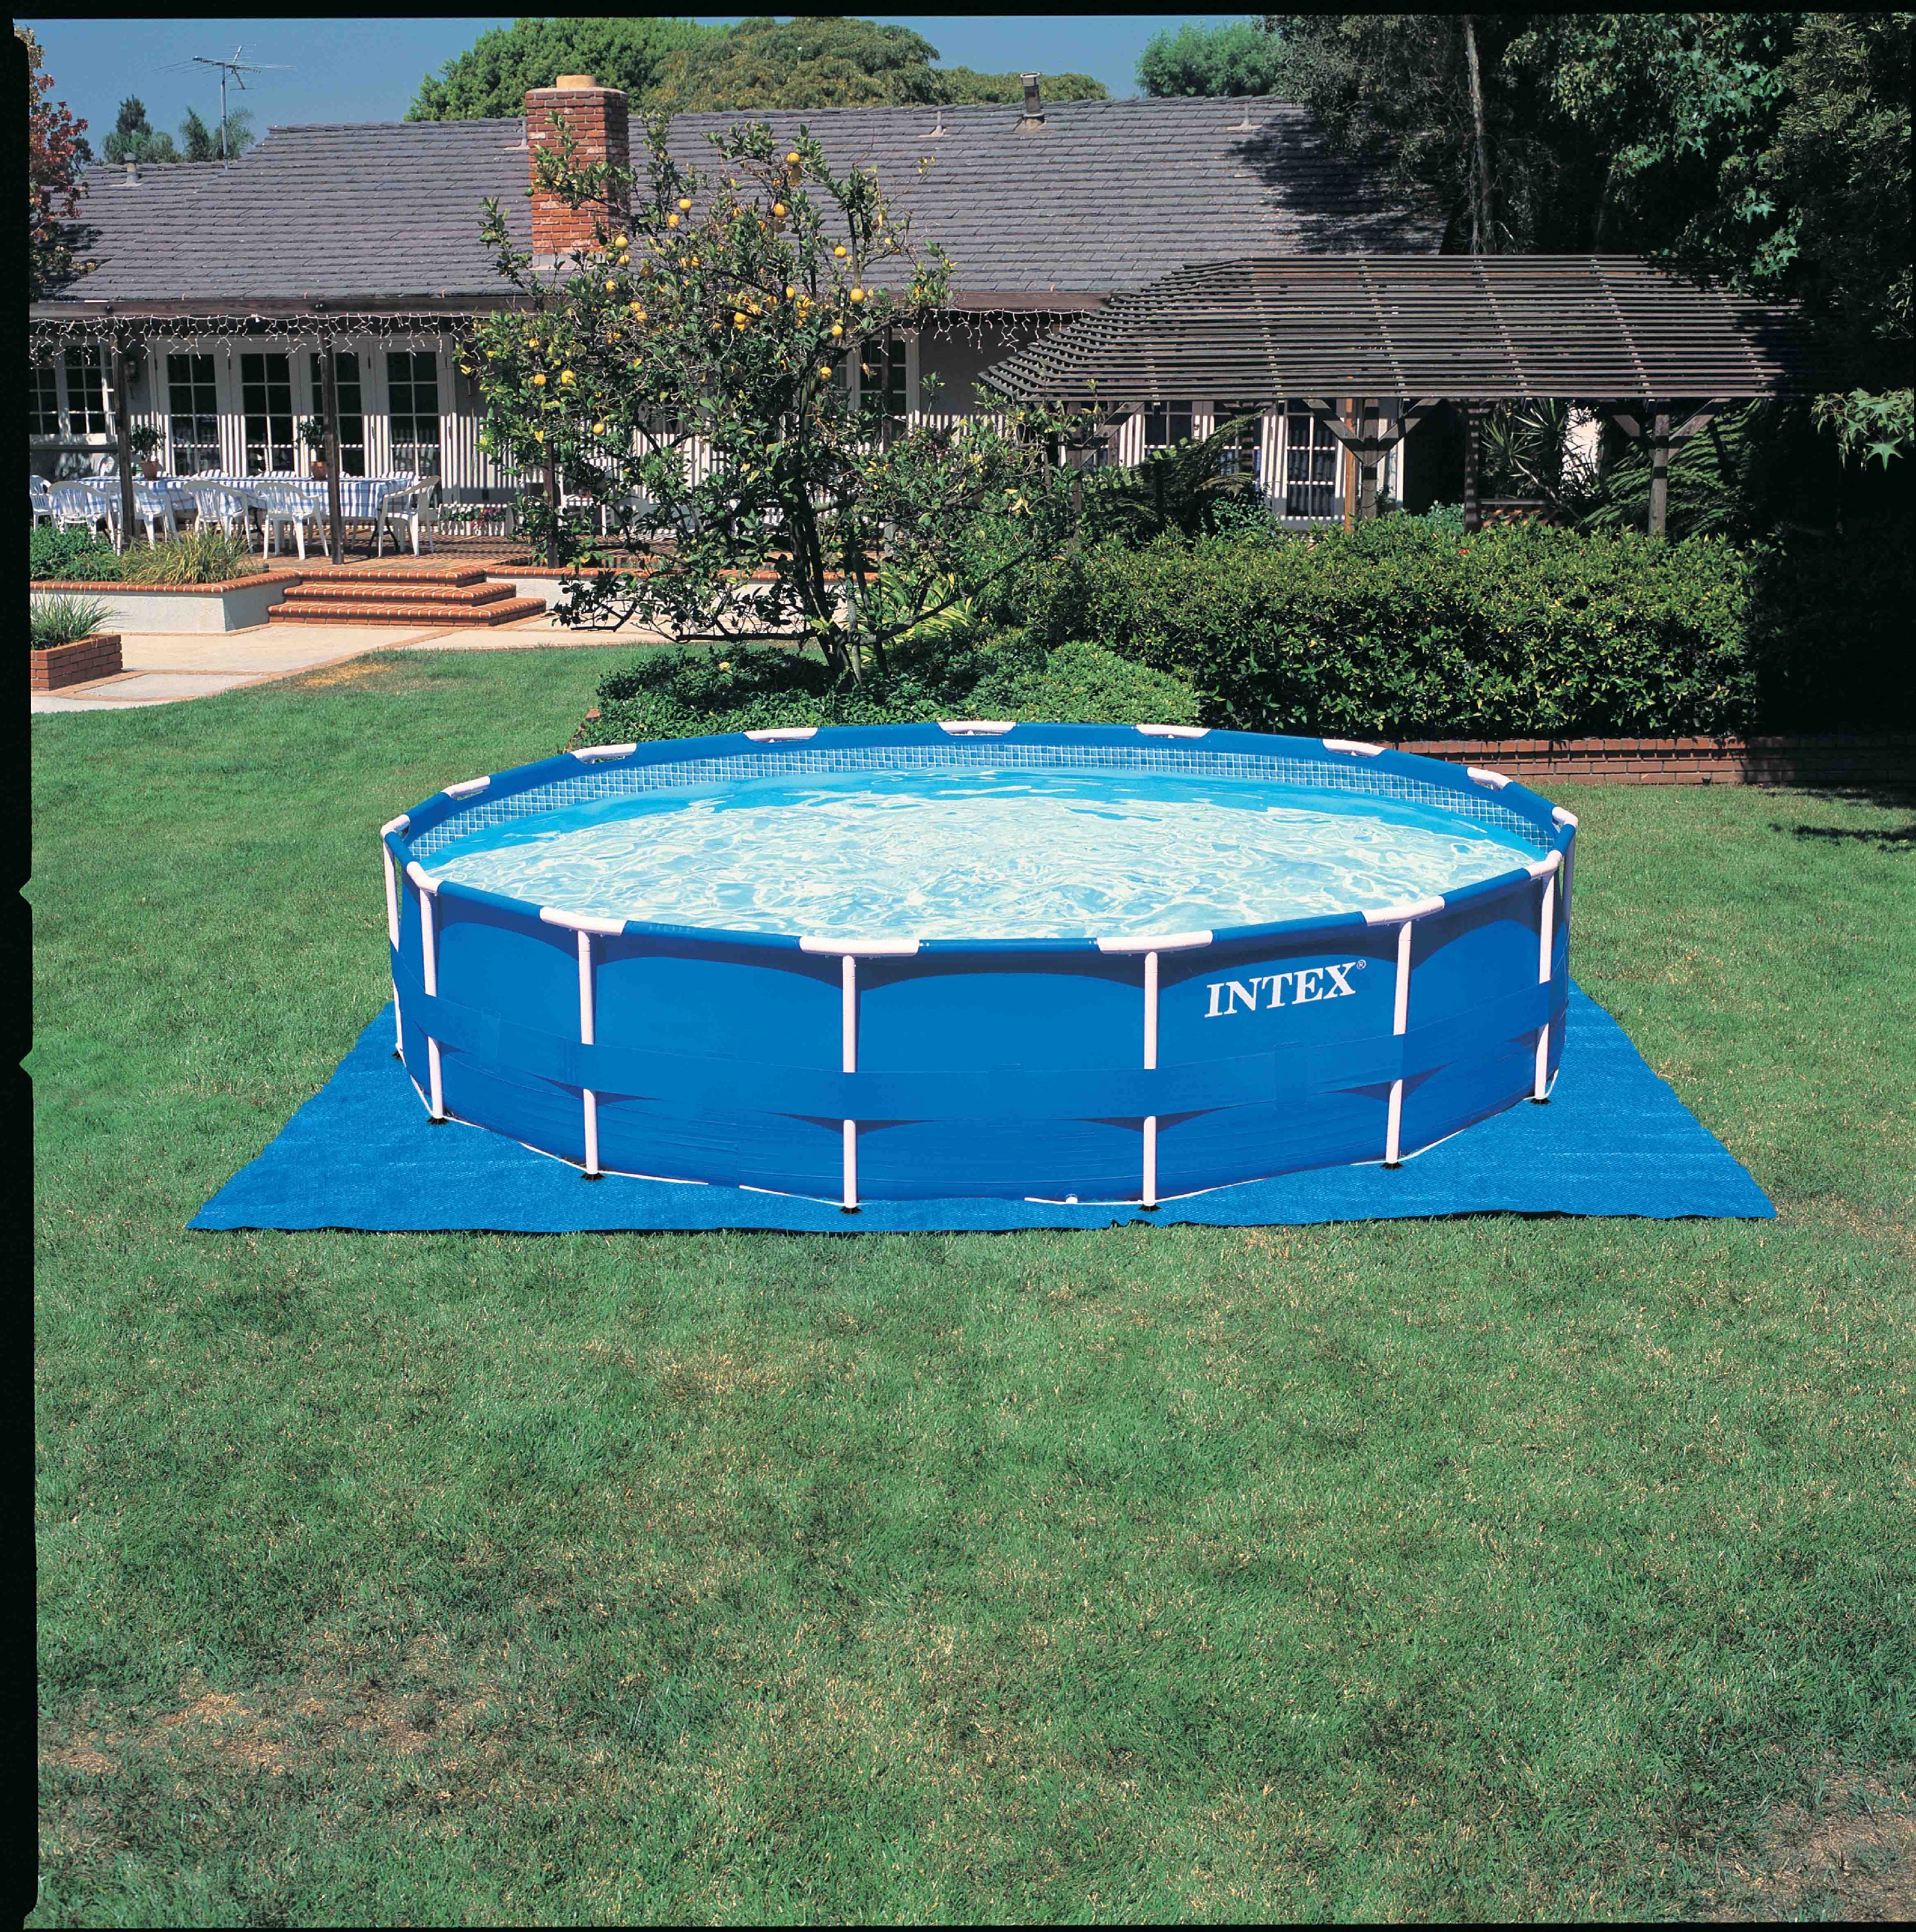 Intex 15' x 48" Metal Frame Above Ground Pool with Filter Pump - image 5 of 7